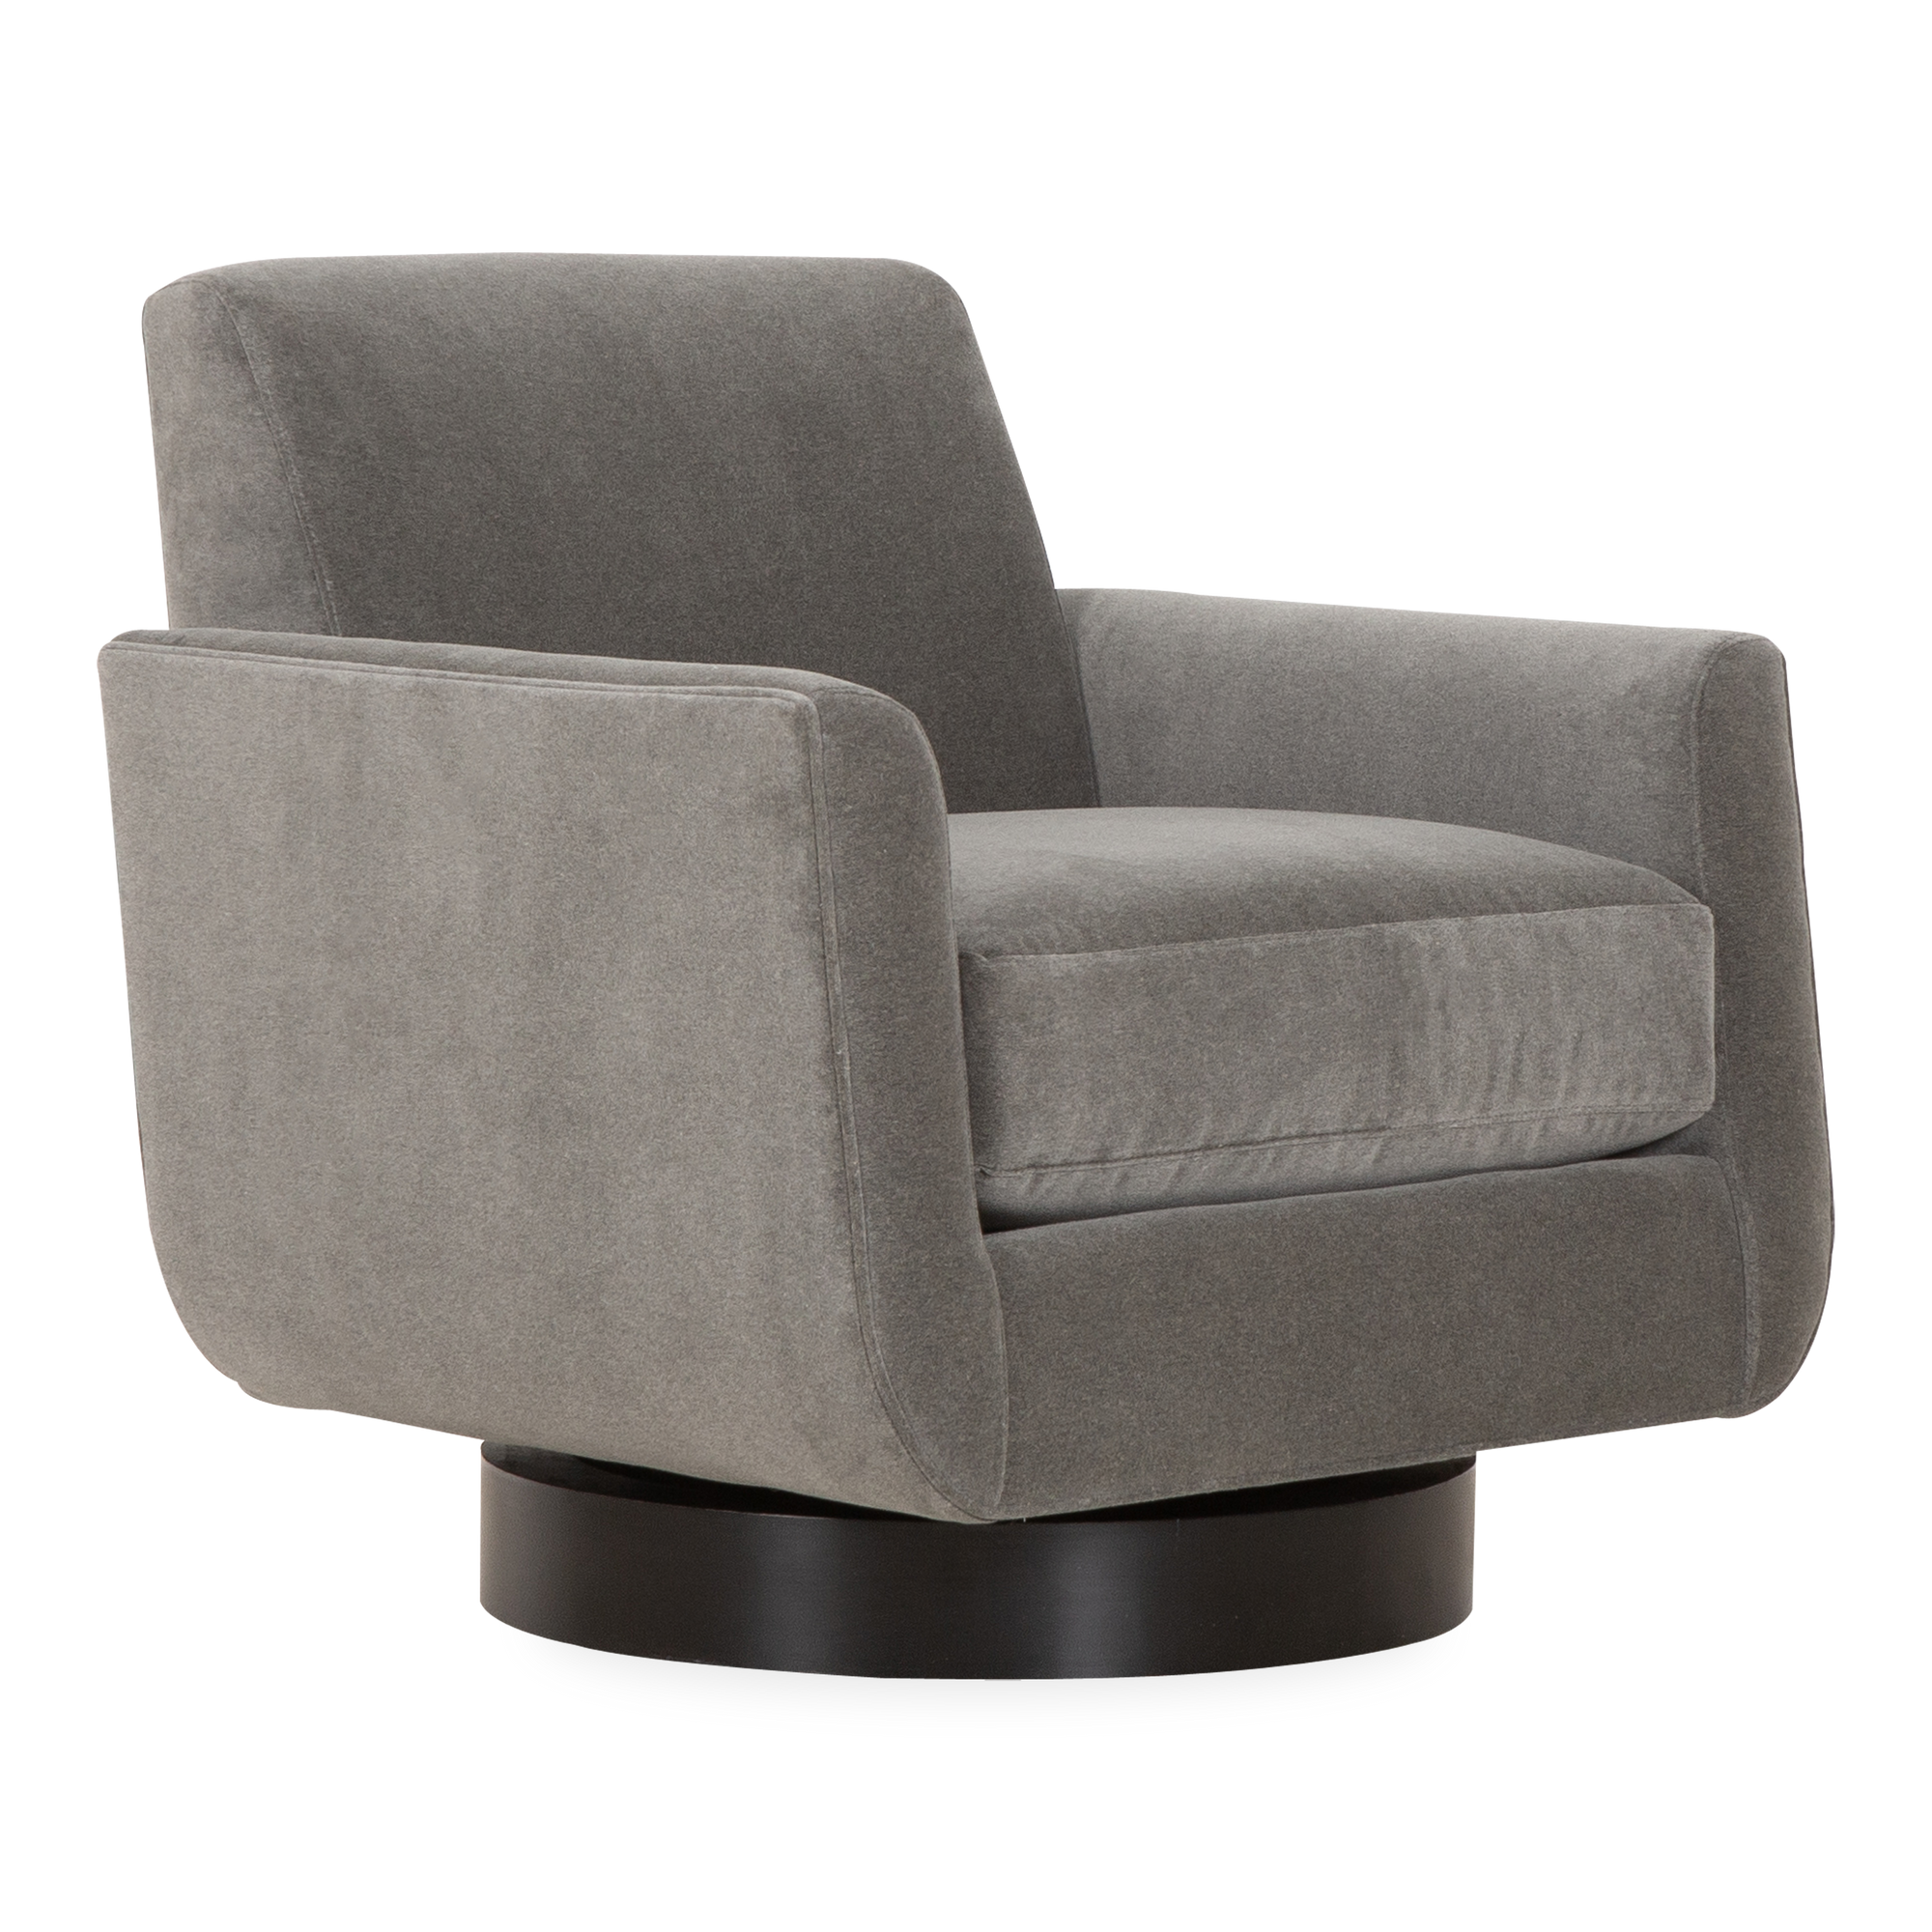 With its space-age design cues and relaxed lounge-style comfort, the Brenner Swivel Chair effortlessly dominates the room from every perspective.